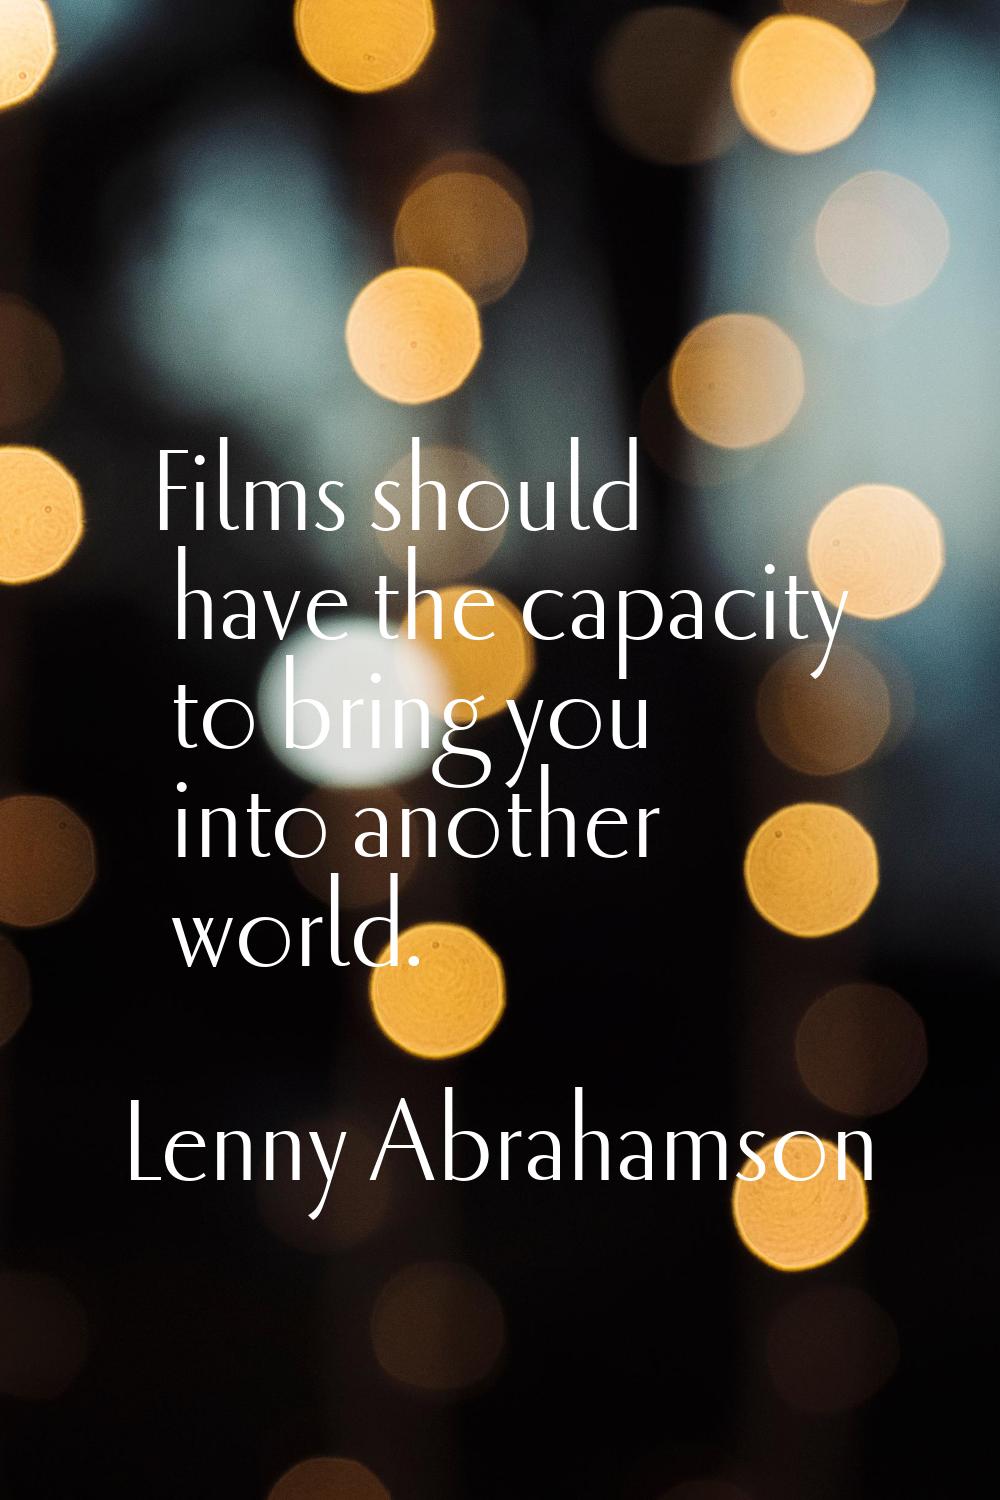 Films should have the capacity to bring you into another world.